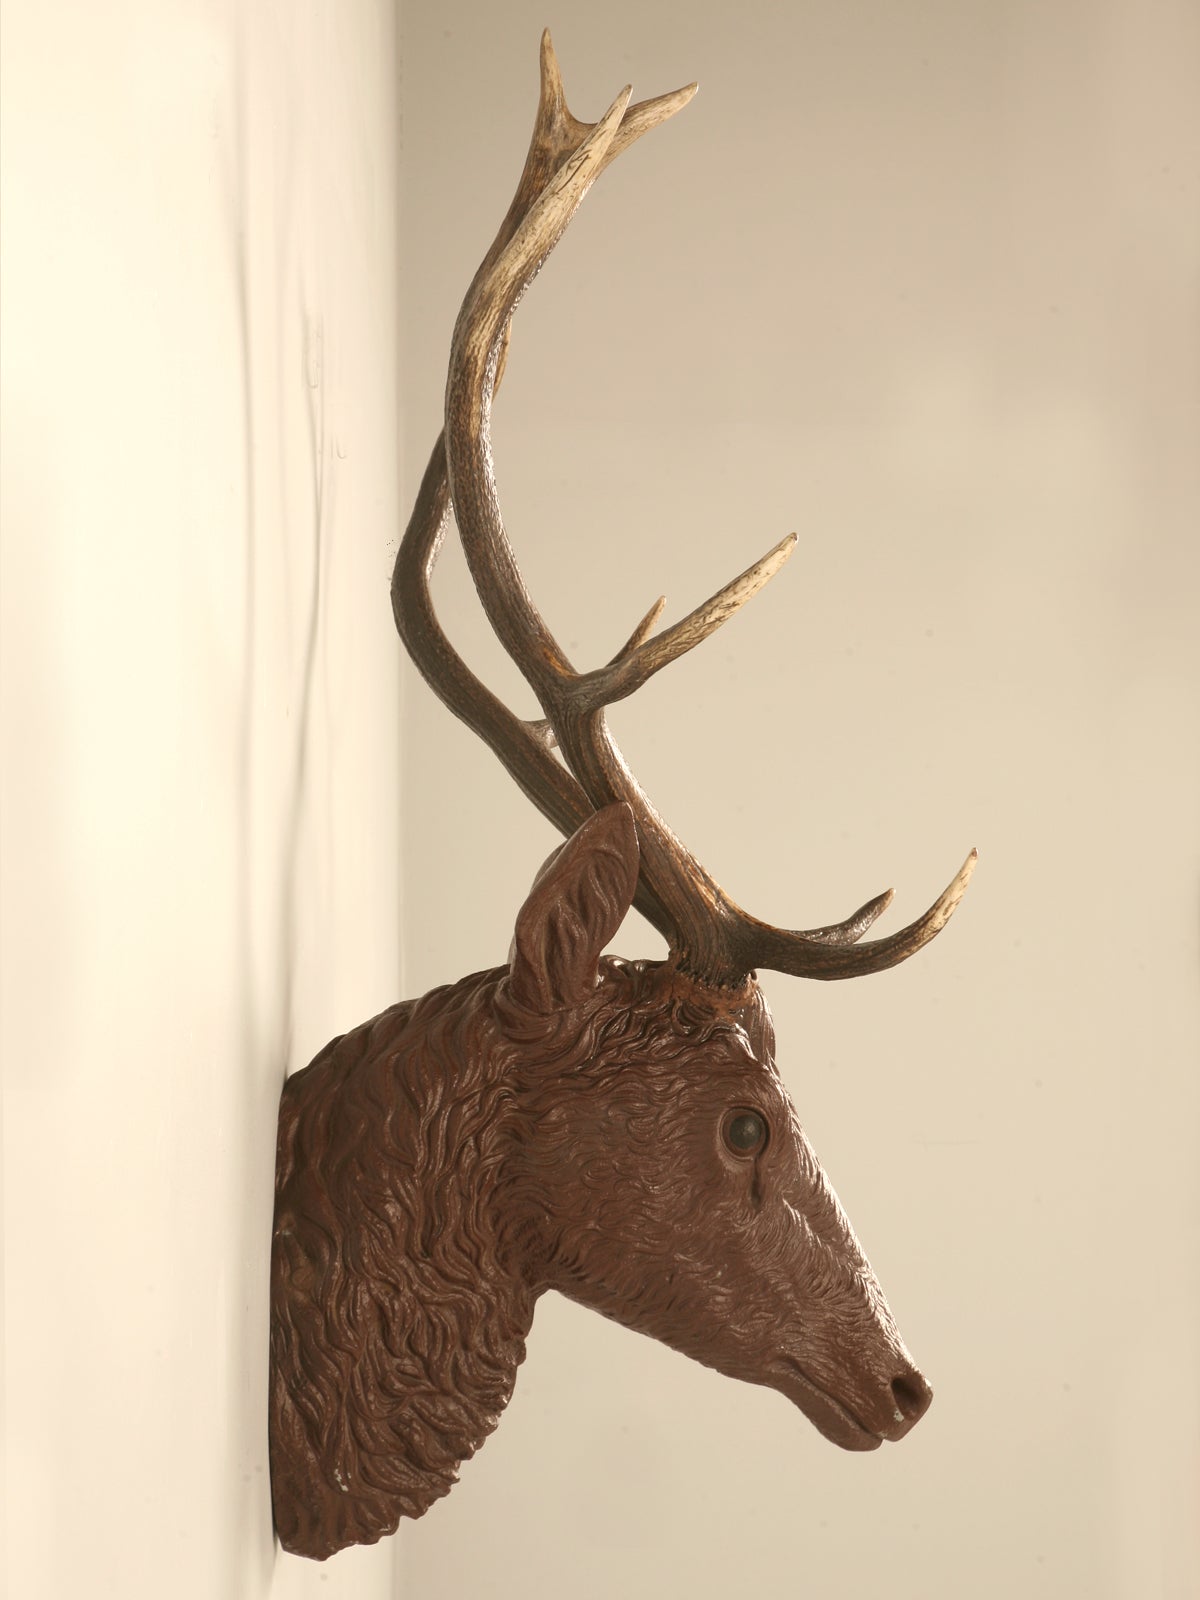 Rare Original Antique French Cast Iron Deer/Stag Wall Trophy Mount